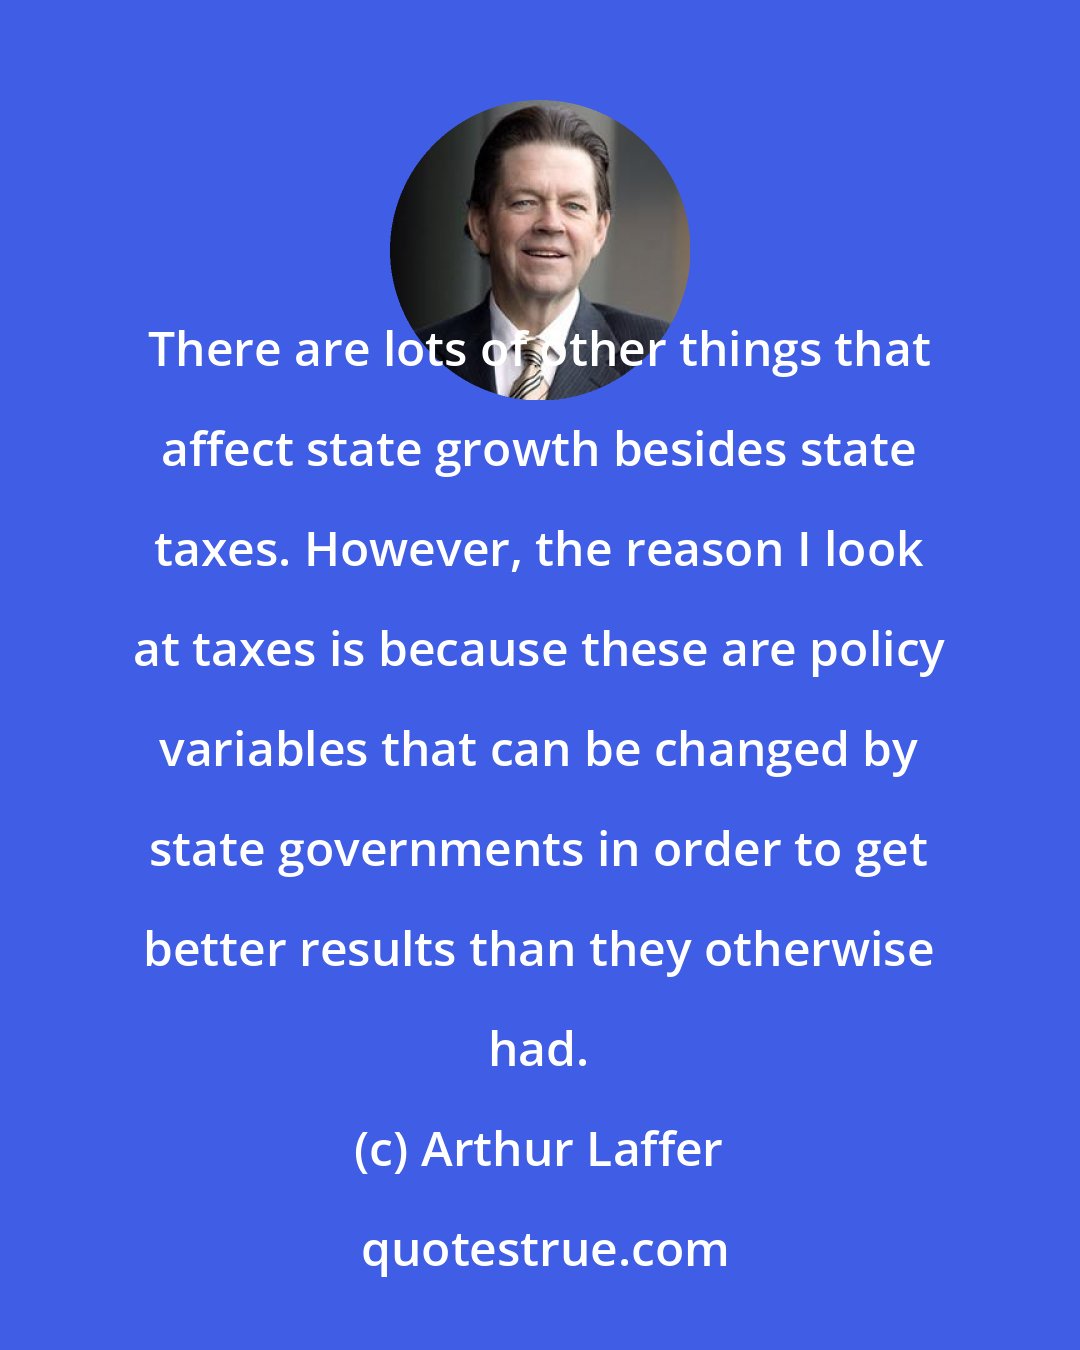 Arthur Laffer: There are lots of other things that affect state growth besides state taxes. However, the reason I look at taxes is because these are policy variables that can be changed by state governments in order to get better results than they otherwise had.